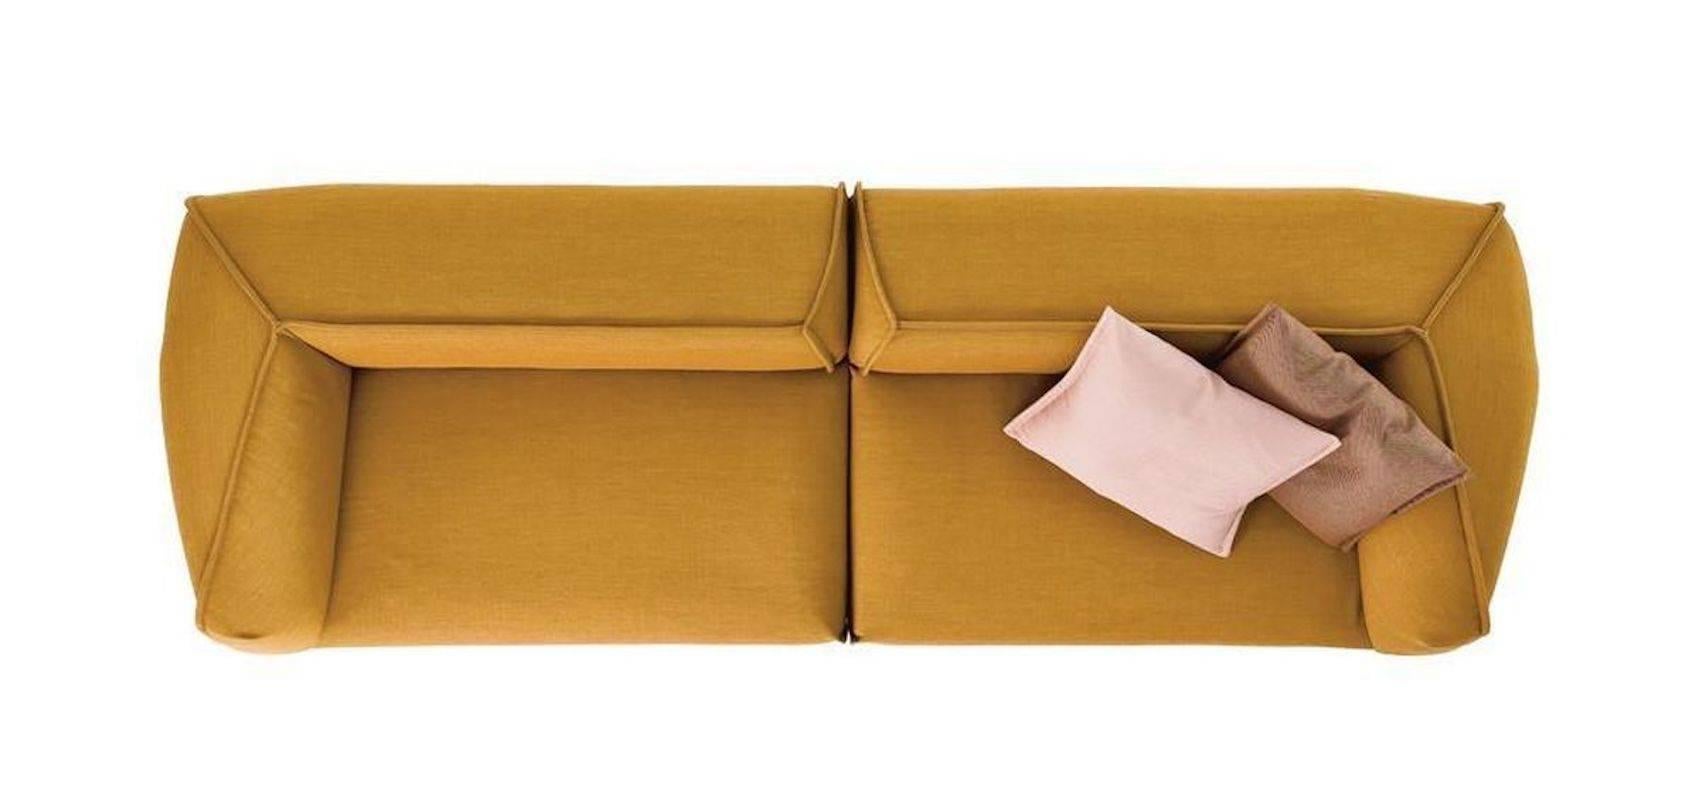 M.A.S.S.A.S Modular Sofa by Patricia Urquiola for Moroso in Fabric im Angebot 4